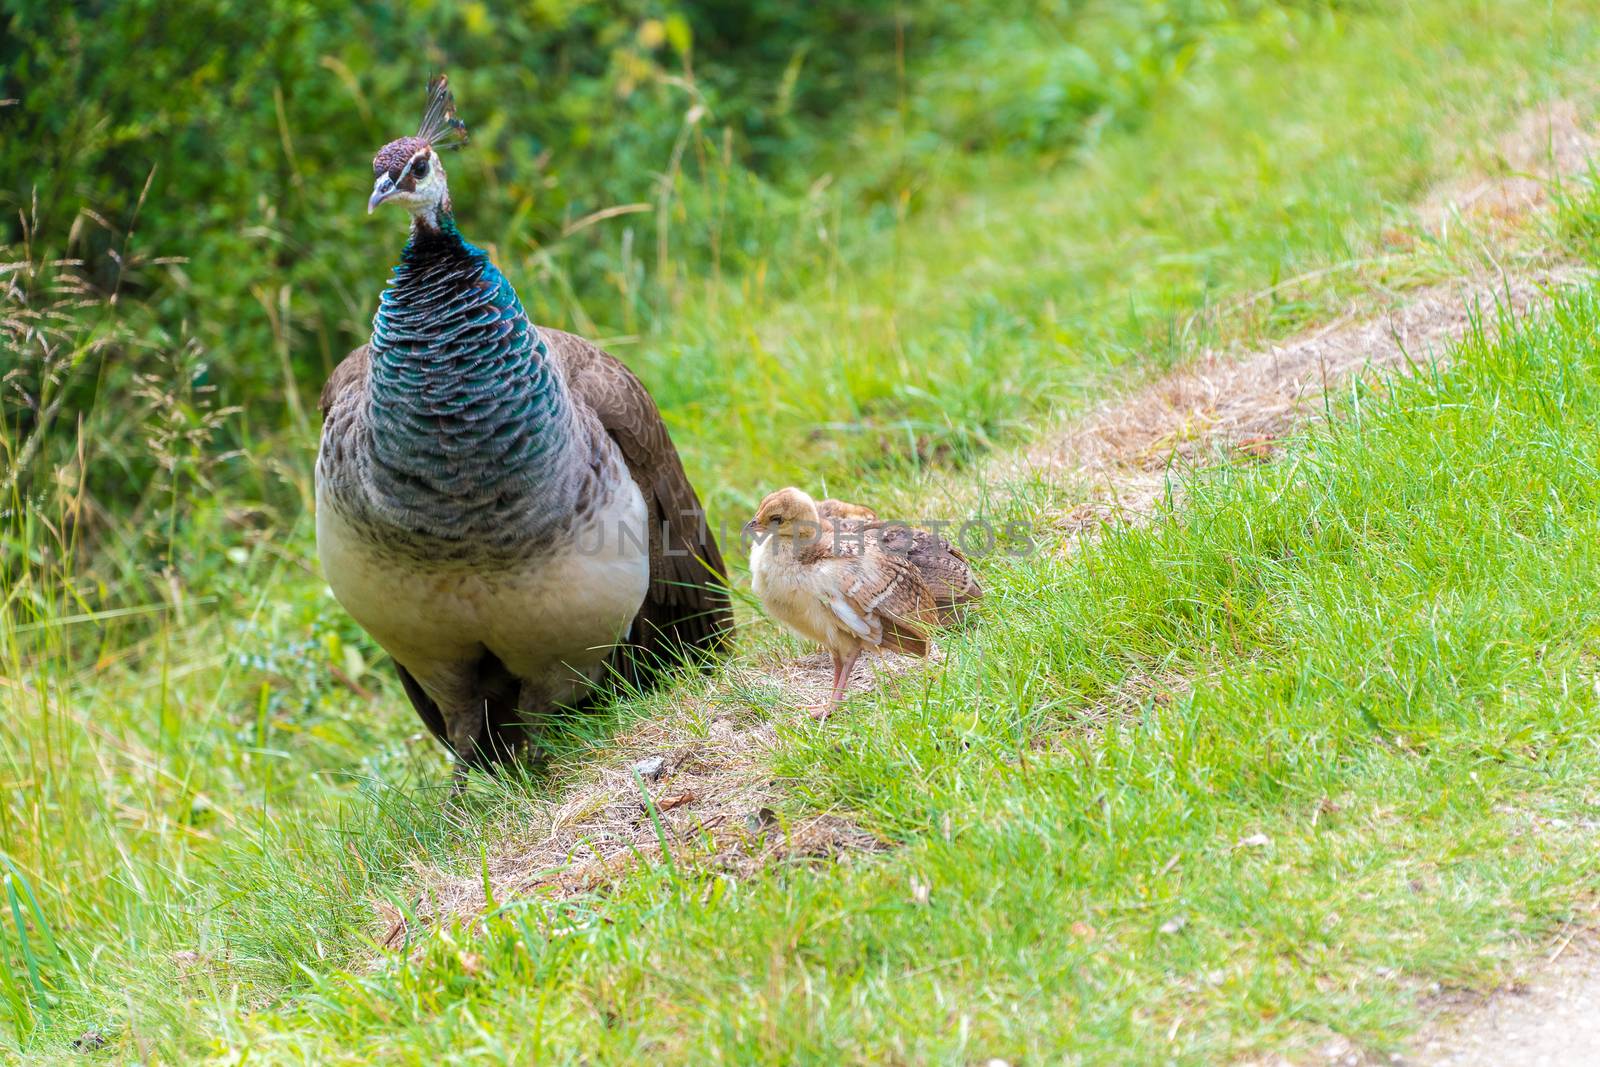 Female Peacock with babies by Russell102